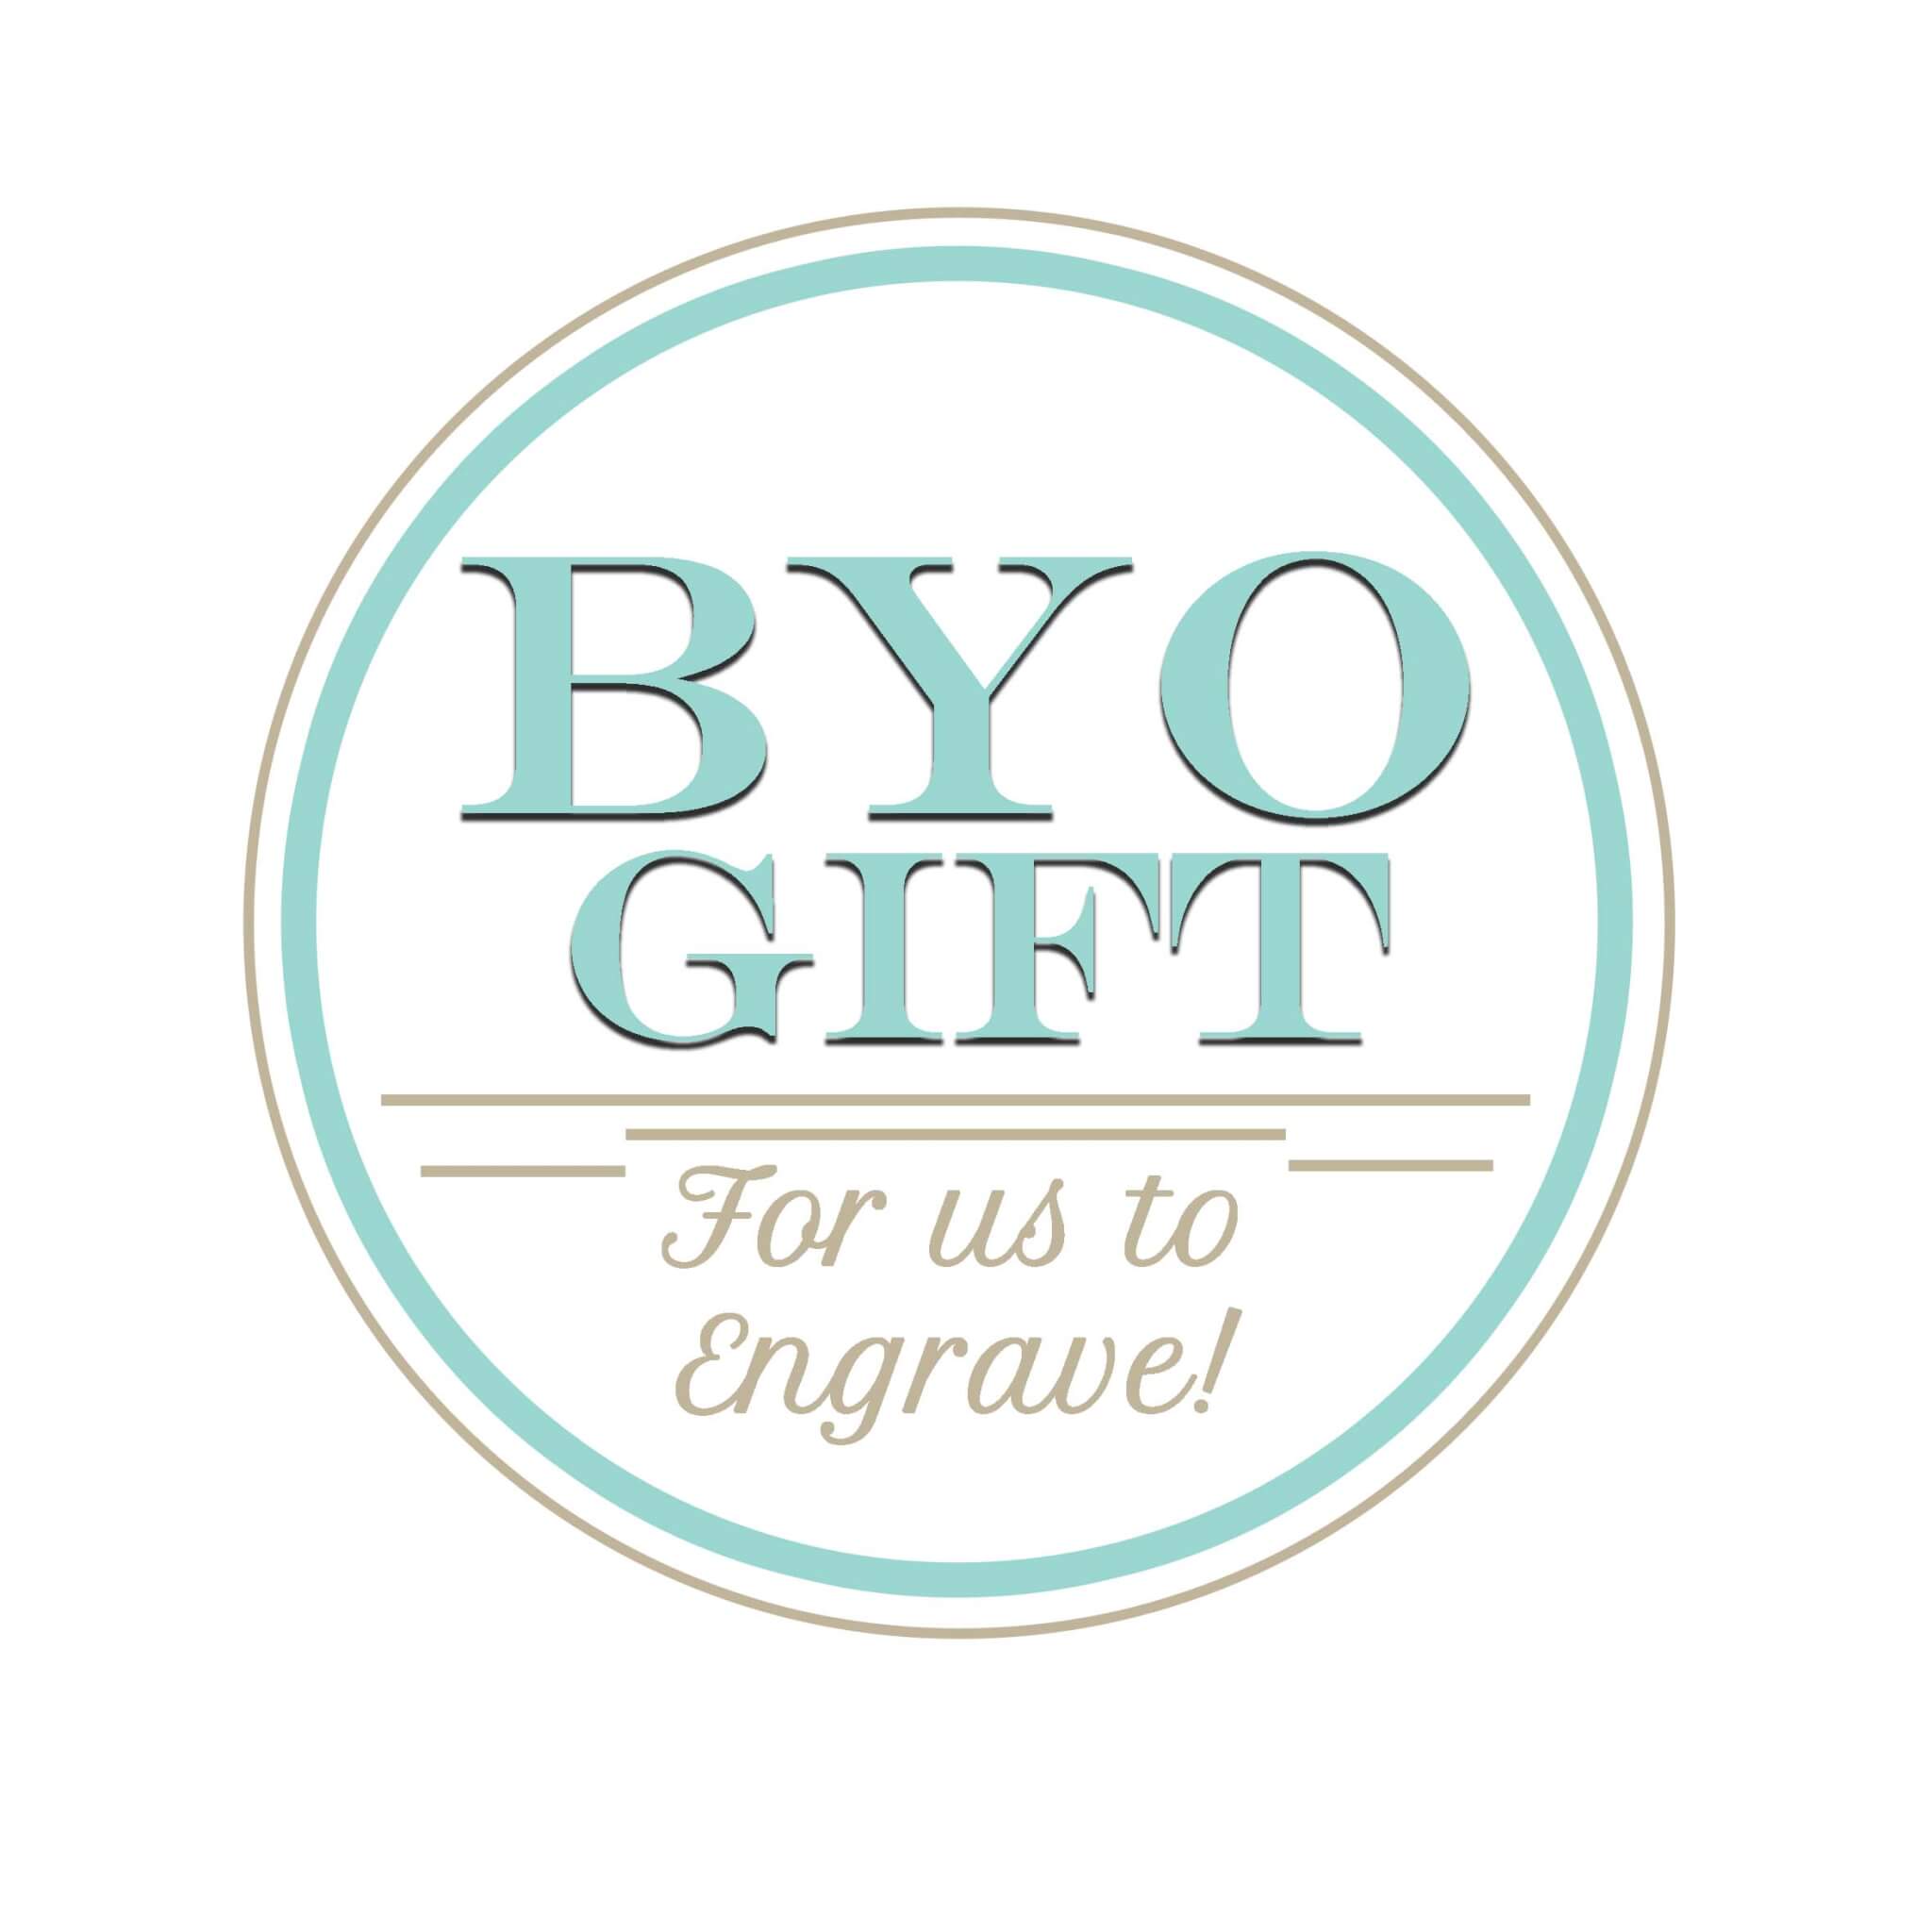 Grand Engrave BYO Gift - personalised gifts and promotional products Brisbane Engraver